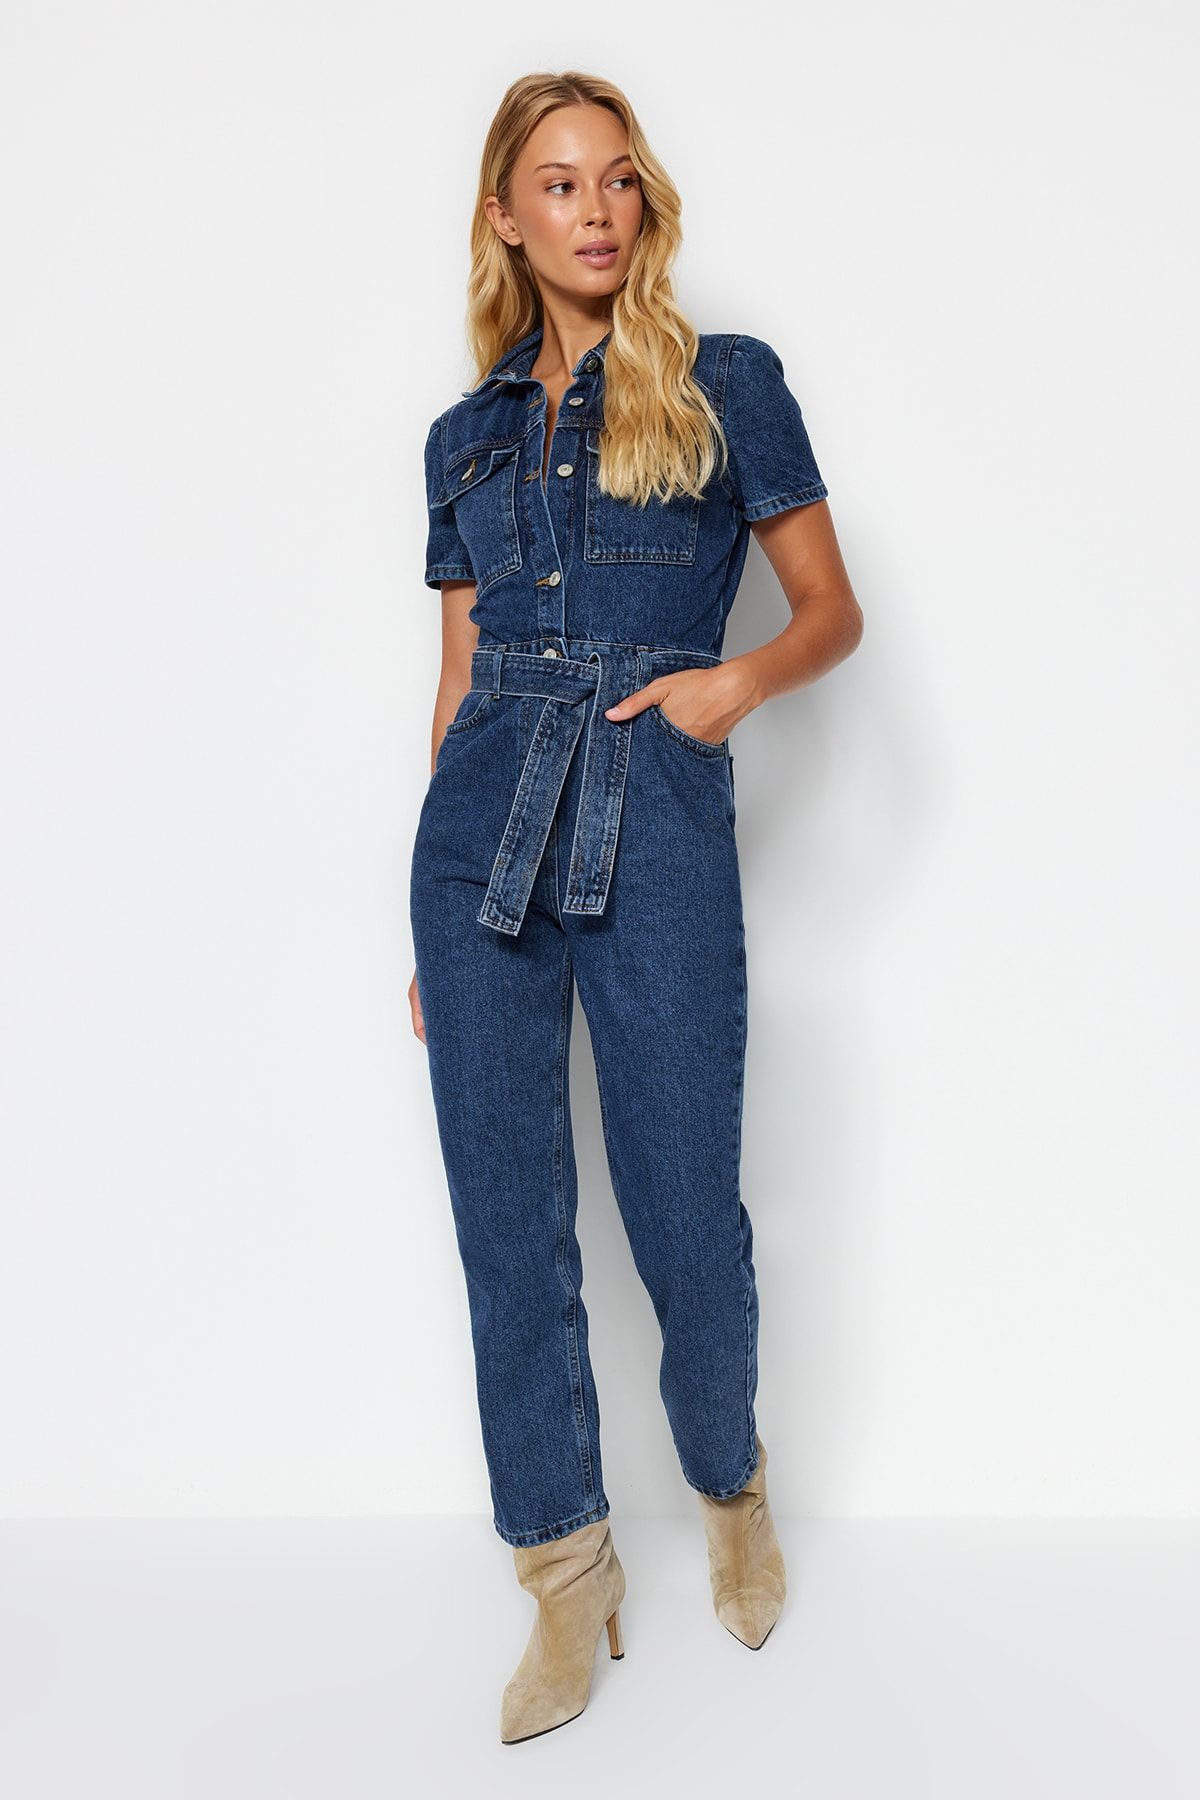 Women Shirt Jumpsuits Cargo One-piece Outfit Button Belted Romper Short  Sleeve Summer Casual Onesie Jumpsuit